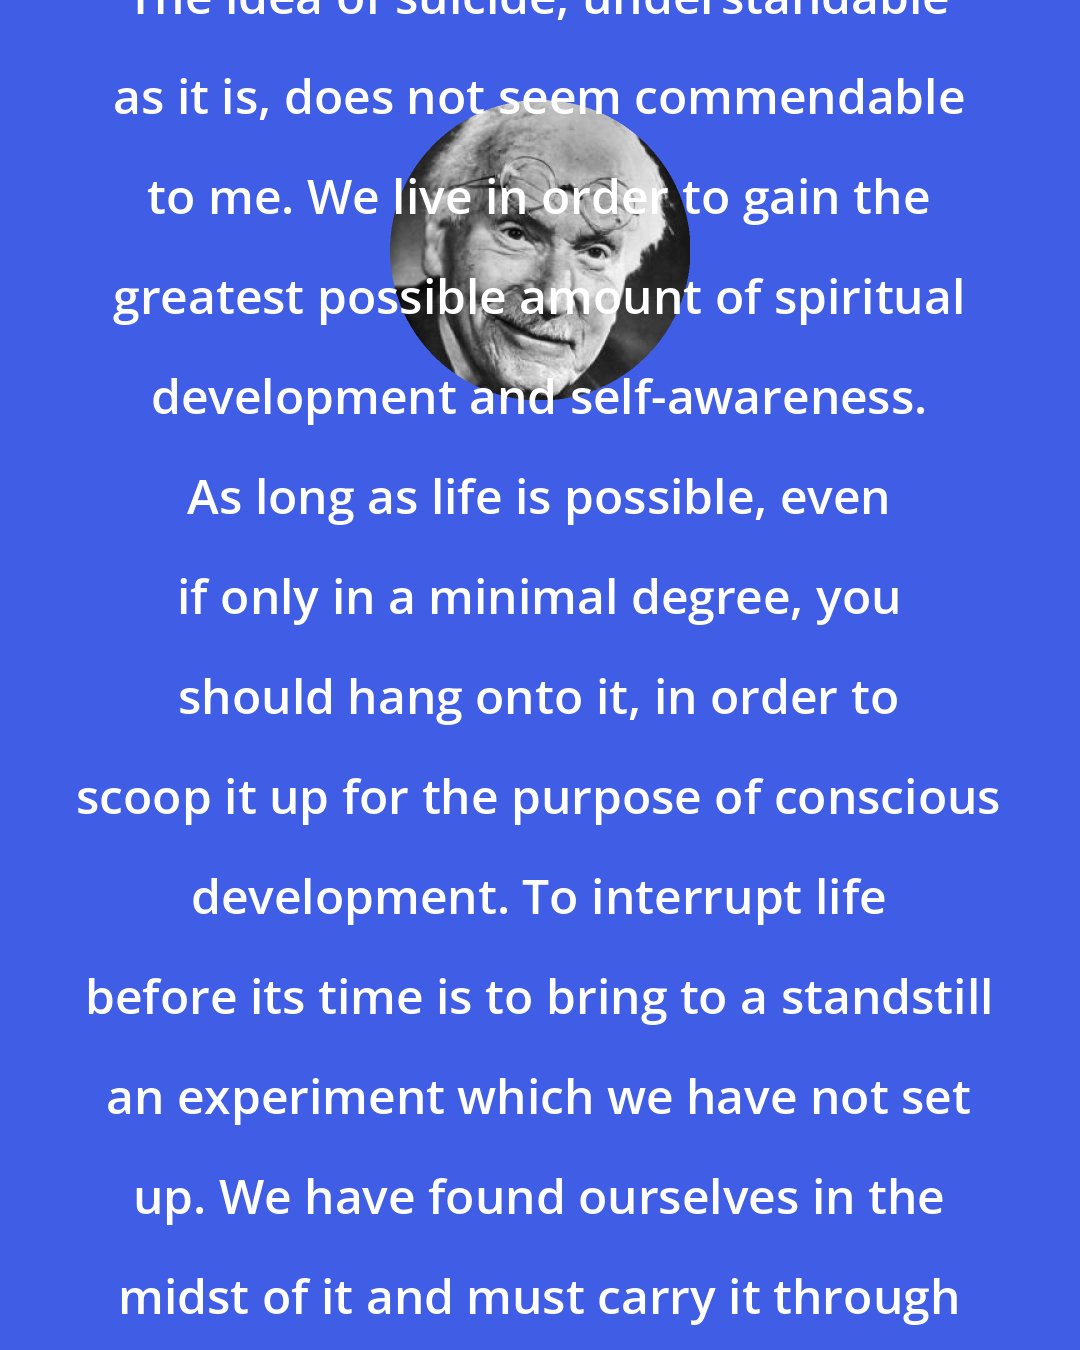 Carl Jung: The idea of suicide, understandable as it is, does not seem commendable to me. We live in order to gain the greatest possible amount of spiritual development and self-awareness. As long as life is possible, even if only in a minimal degree, you should hang onto it, in order to scoop it up for the purpose of conscious development. To interrupt life before its time is to bring to a standstill an experiment which we have not set up. We have found ourselves in the midst of it and must carry it through to the end.